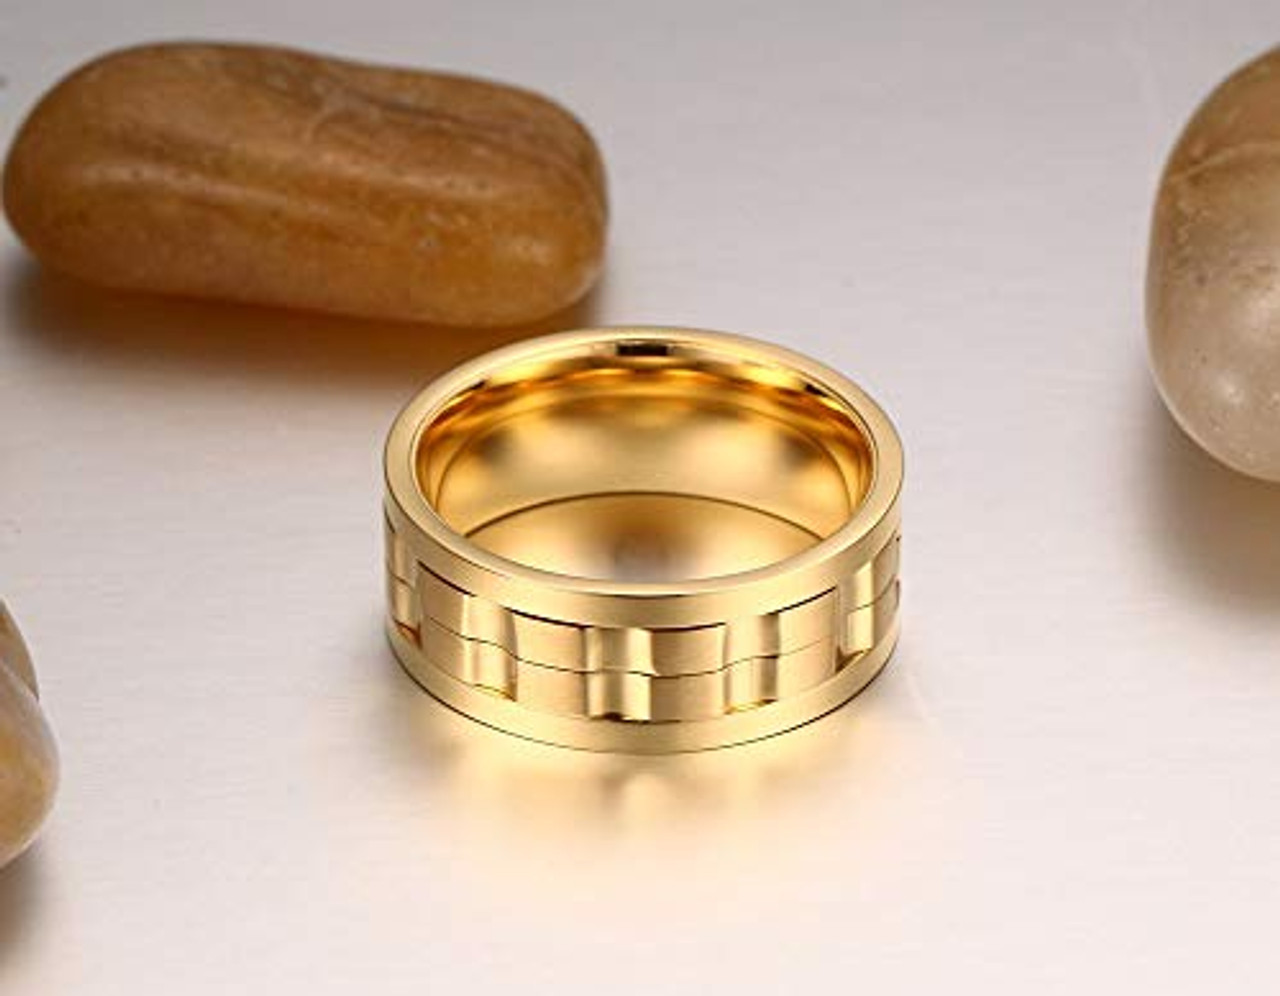 (9mm)  Unisex or Men's Stainless Steel Wedding ring band. Yellow Gold with Rotating Spinner Center Brick Style Ring